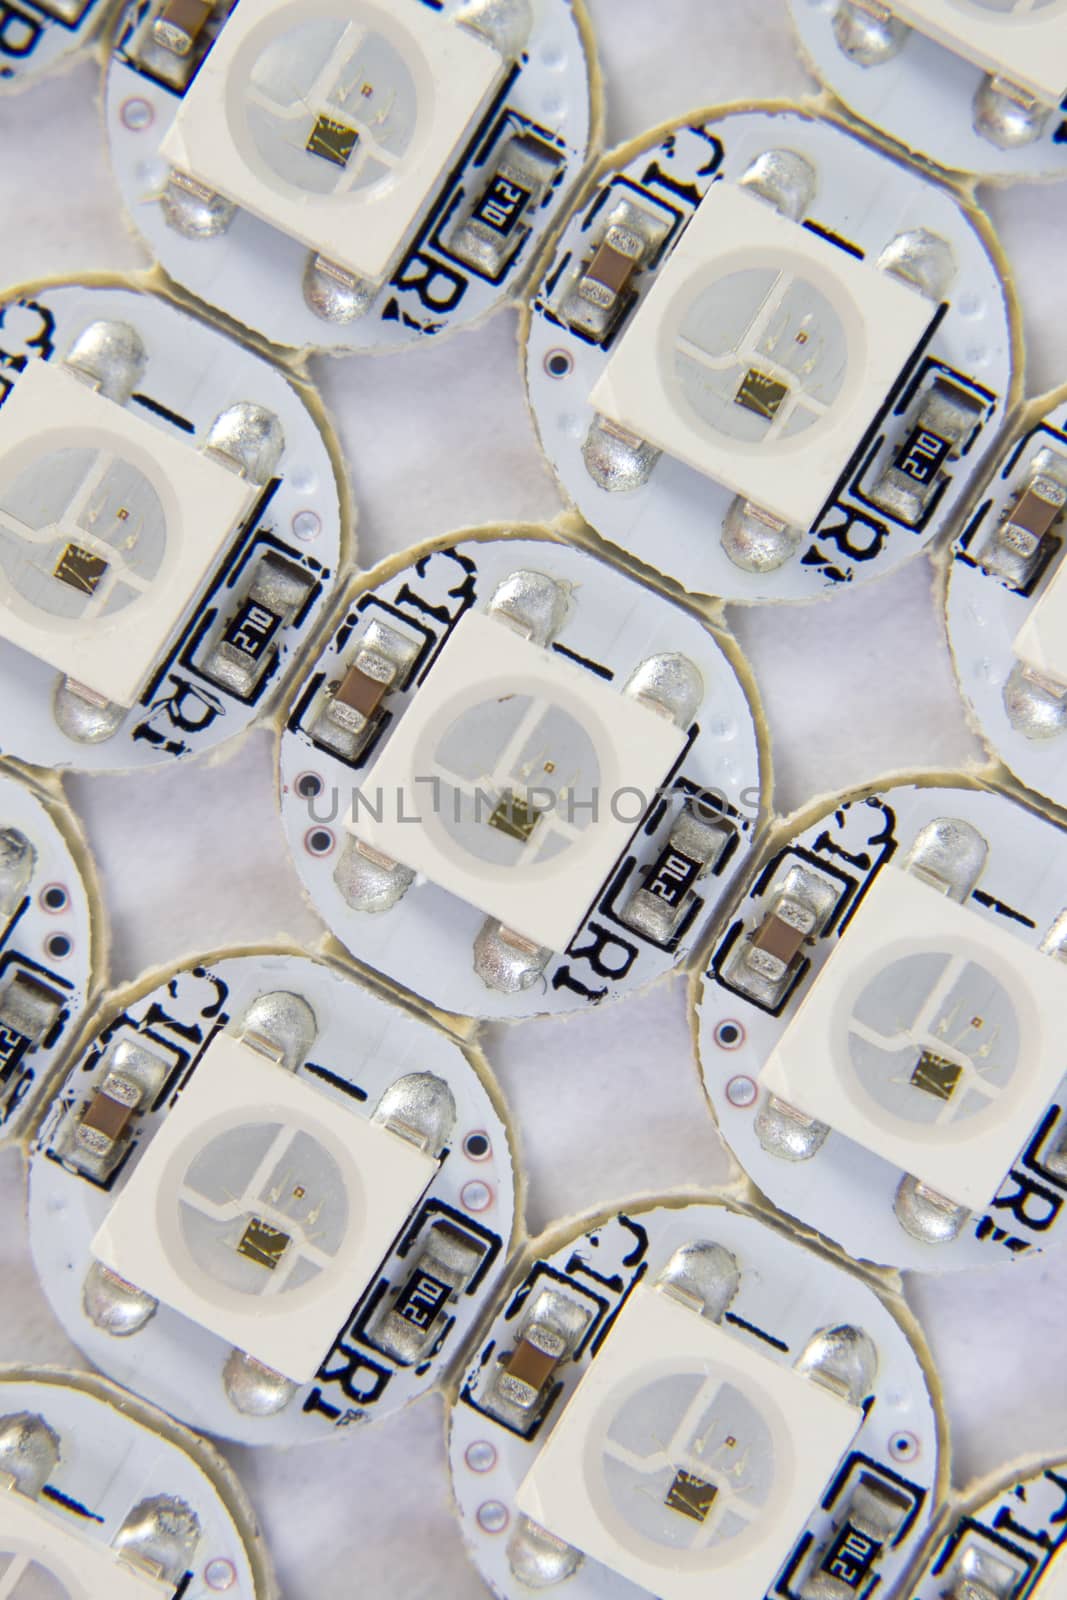 Close up of ws2812b rgb led diods.